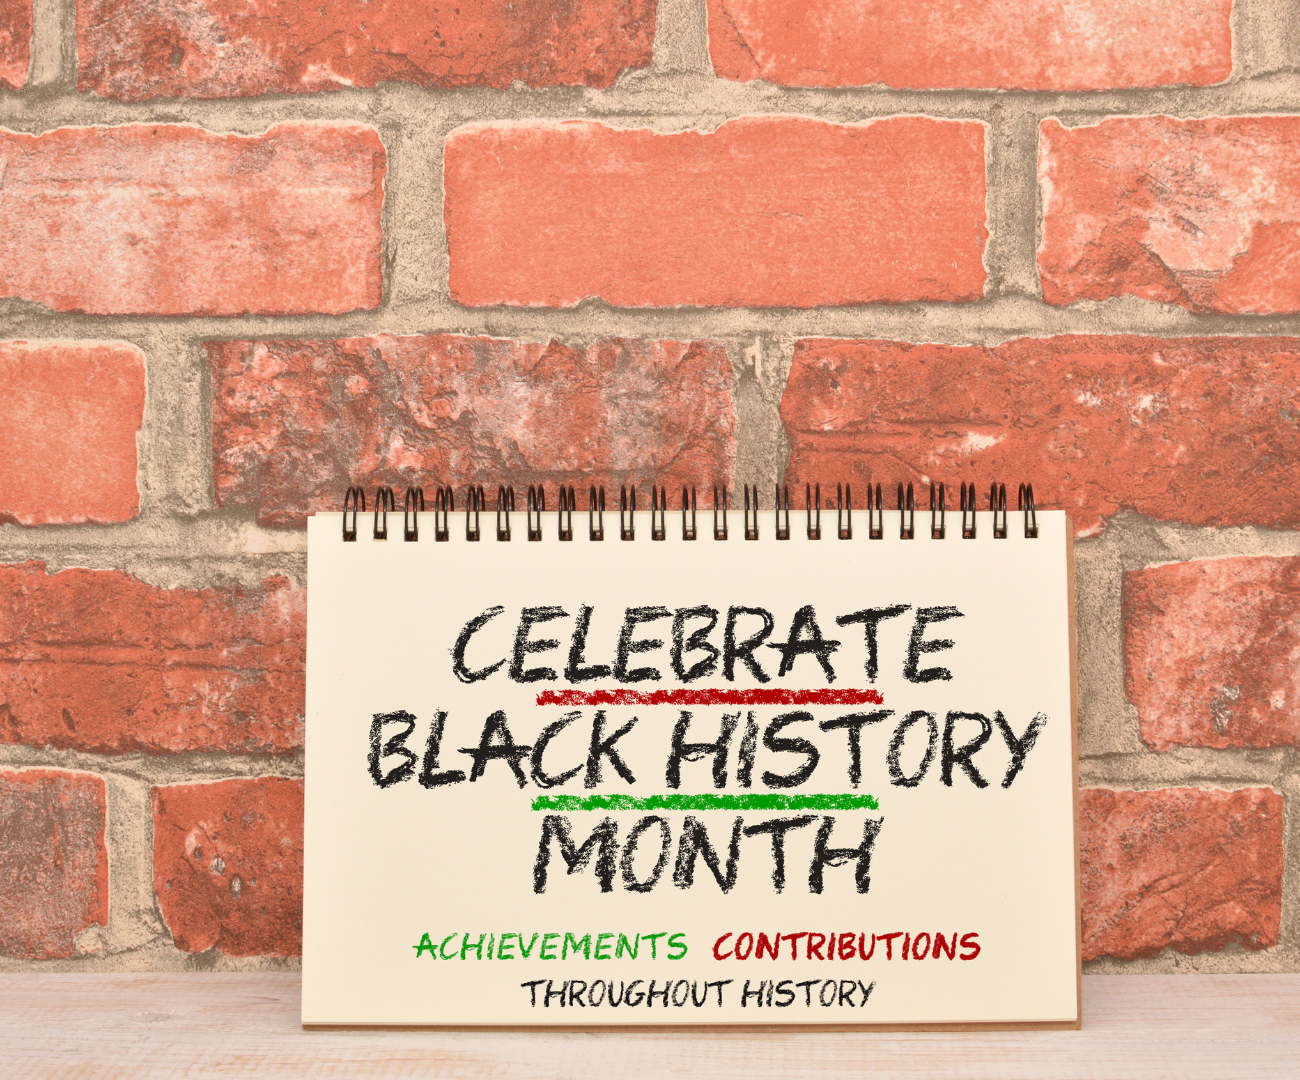 Fun facts about Black History Month themes